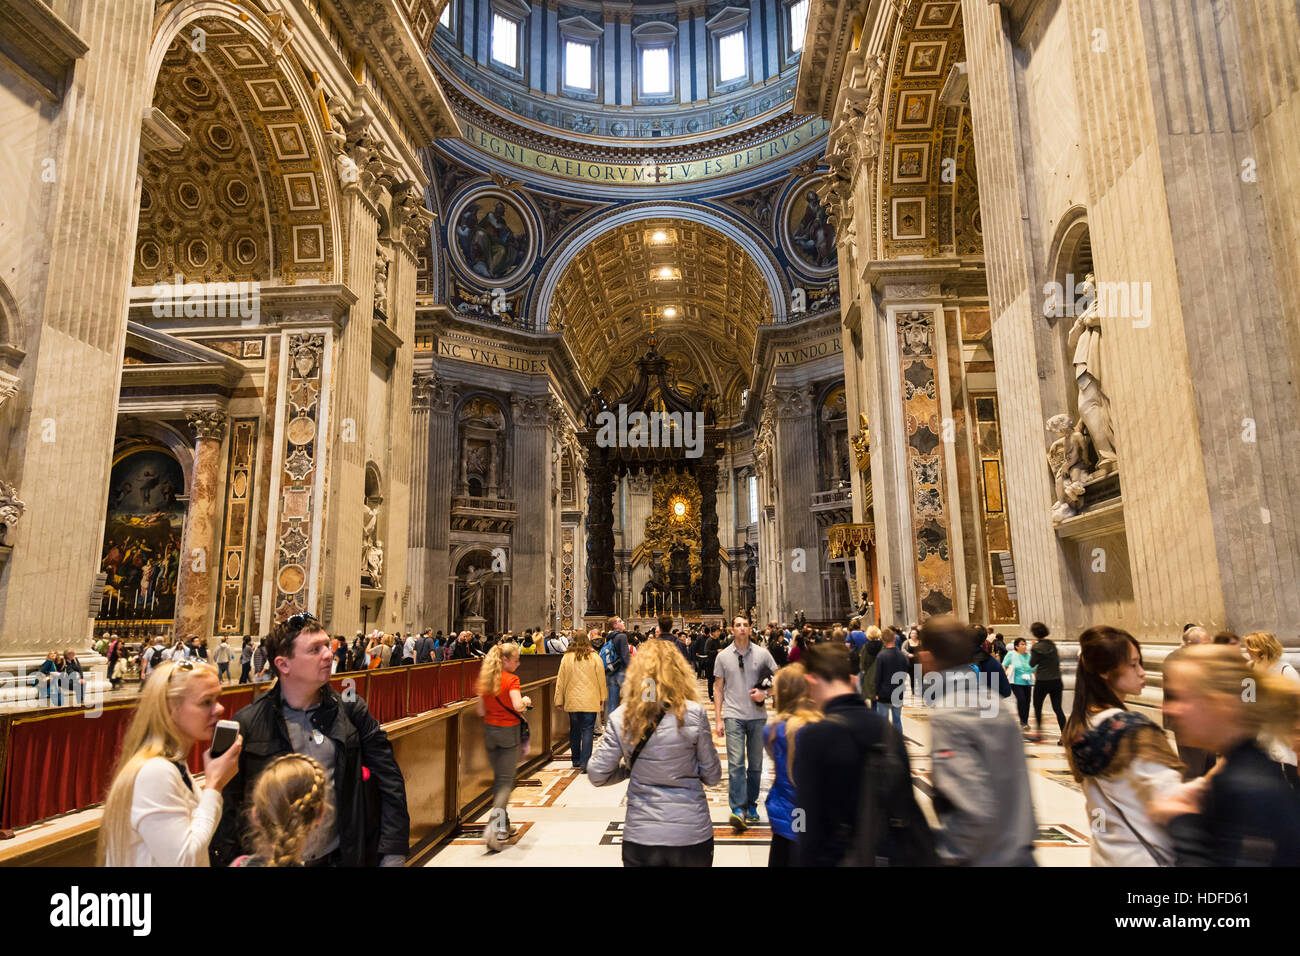 VATICAN, ITALY - NOVEMBER 2, 2016: visitors in Papal Basilica of St Peter. Basilica is Catholic Cathedral, the central and most prominent building of Stock Photo